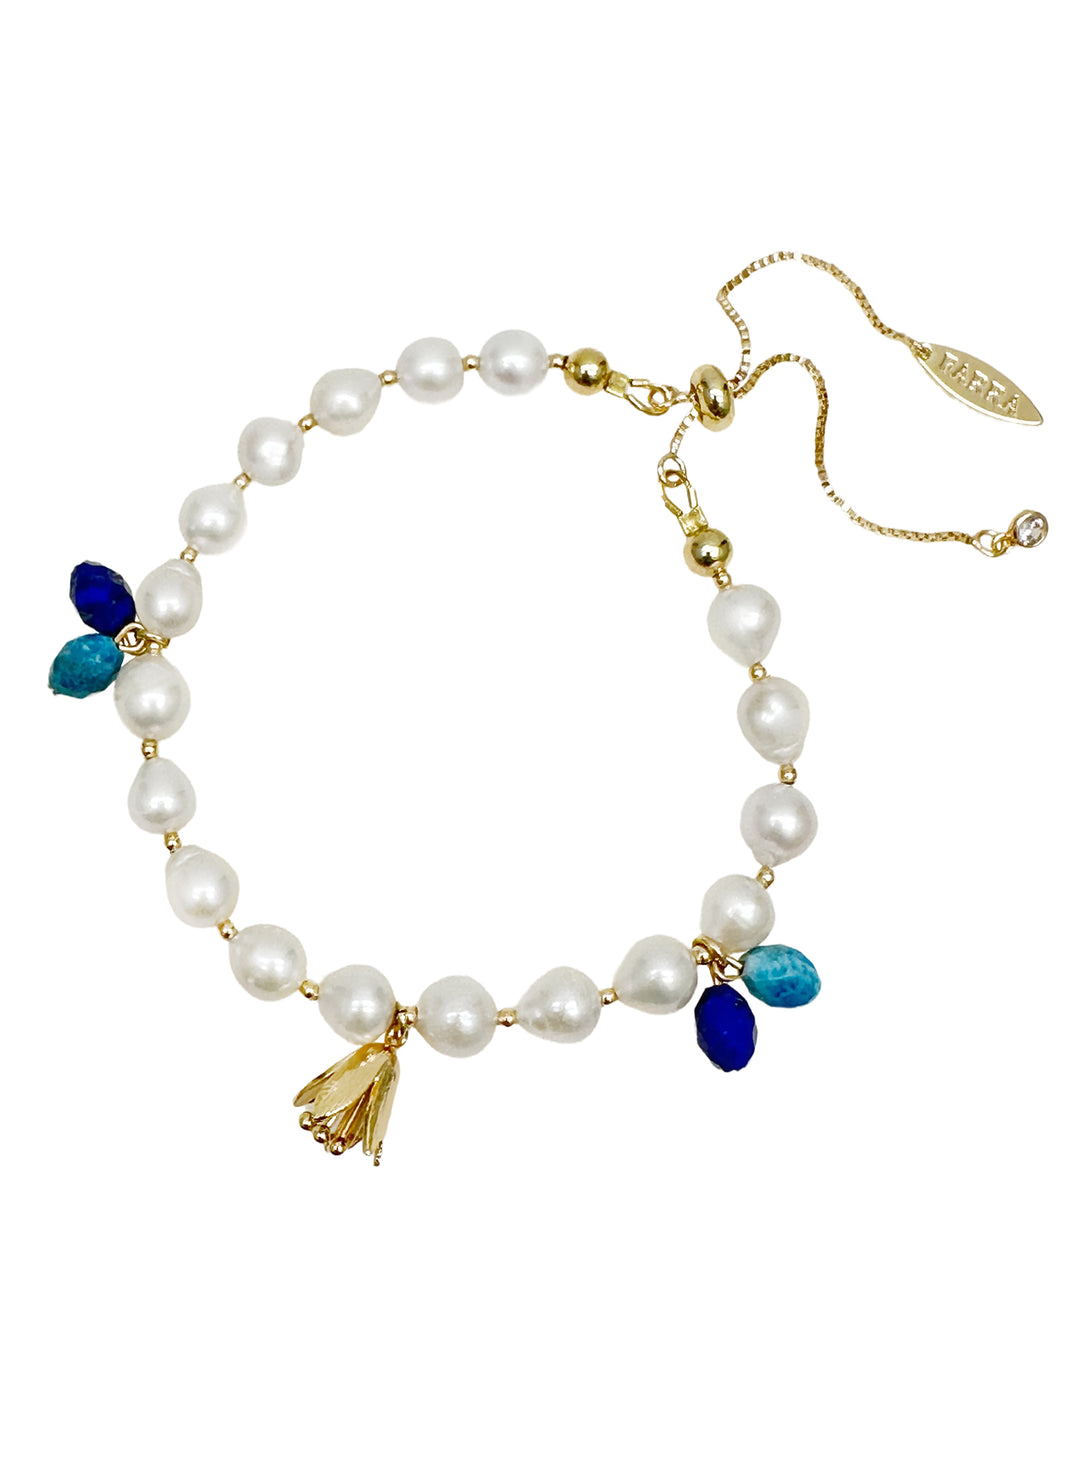 Freshwater Pearls With Blue Gemstone and Flower Charms Bracelet LB008 - FARRA